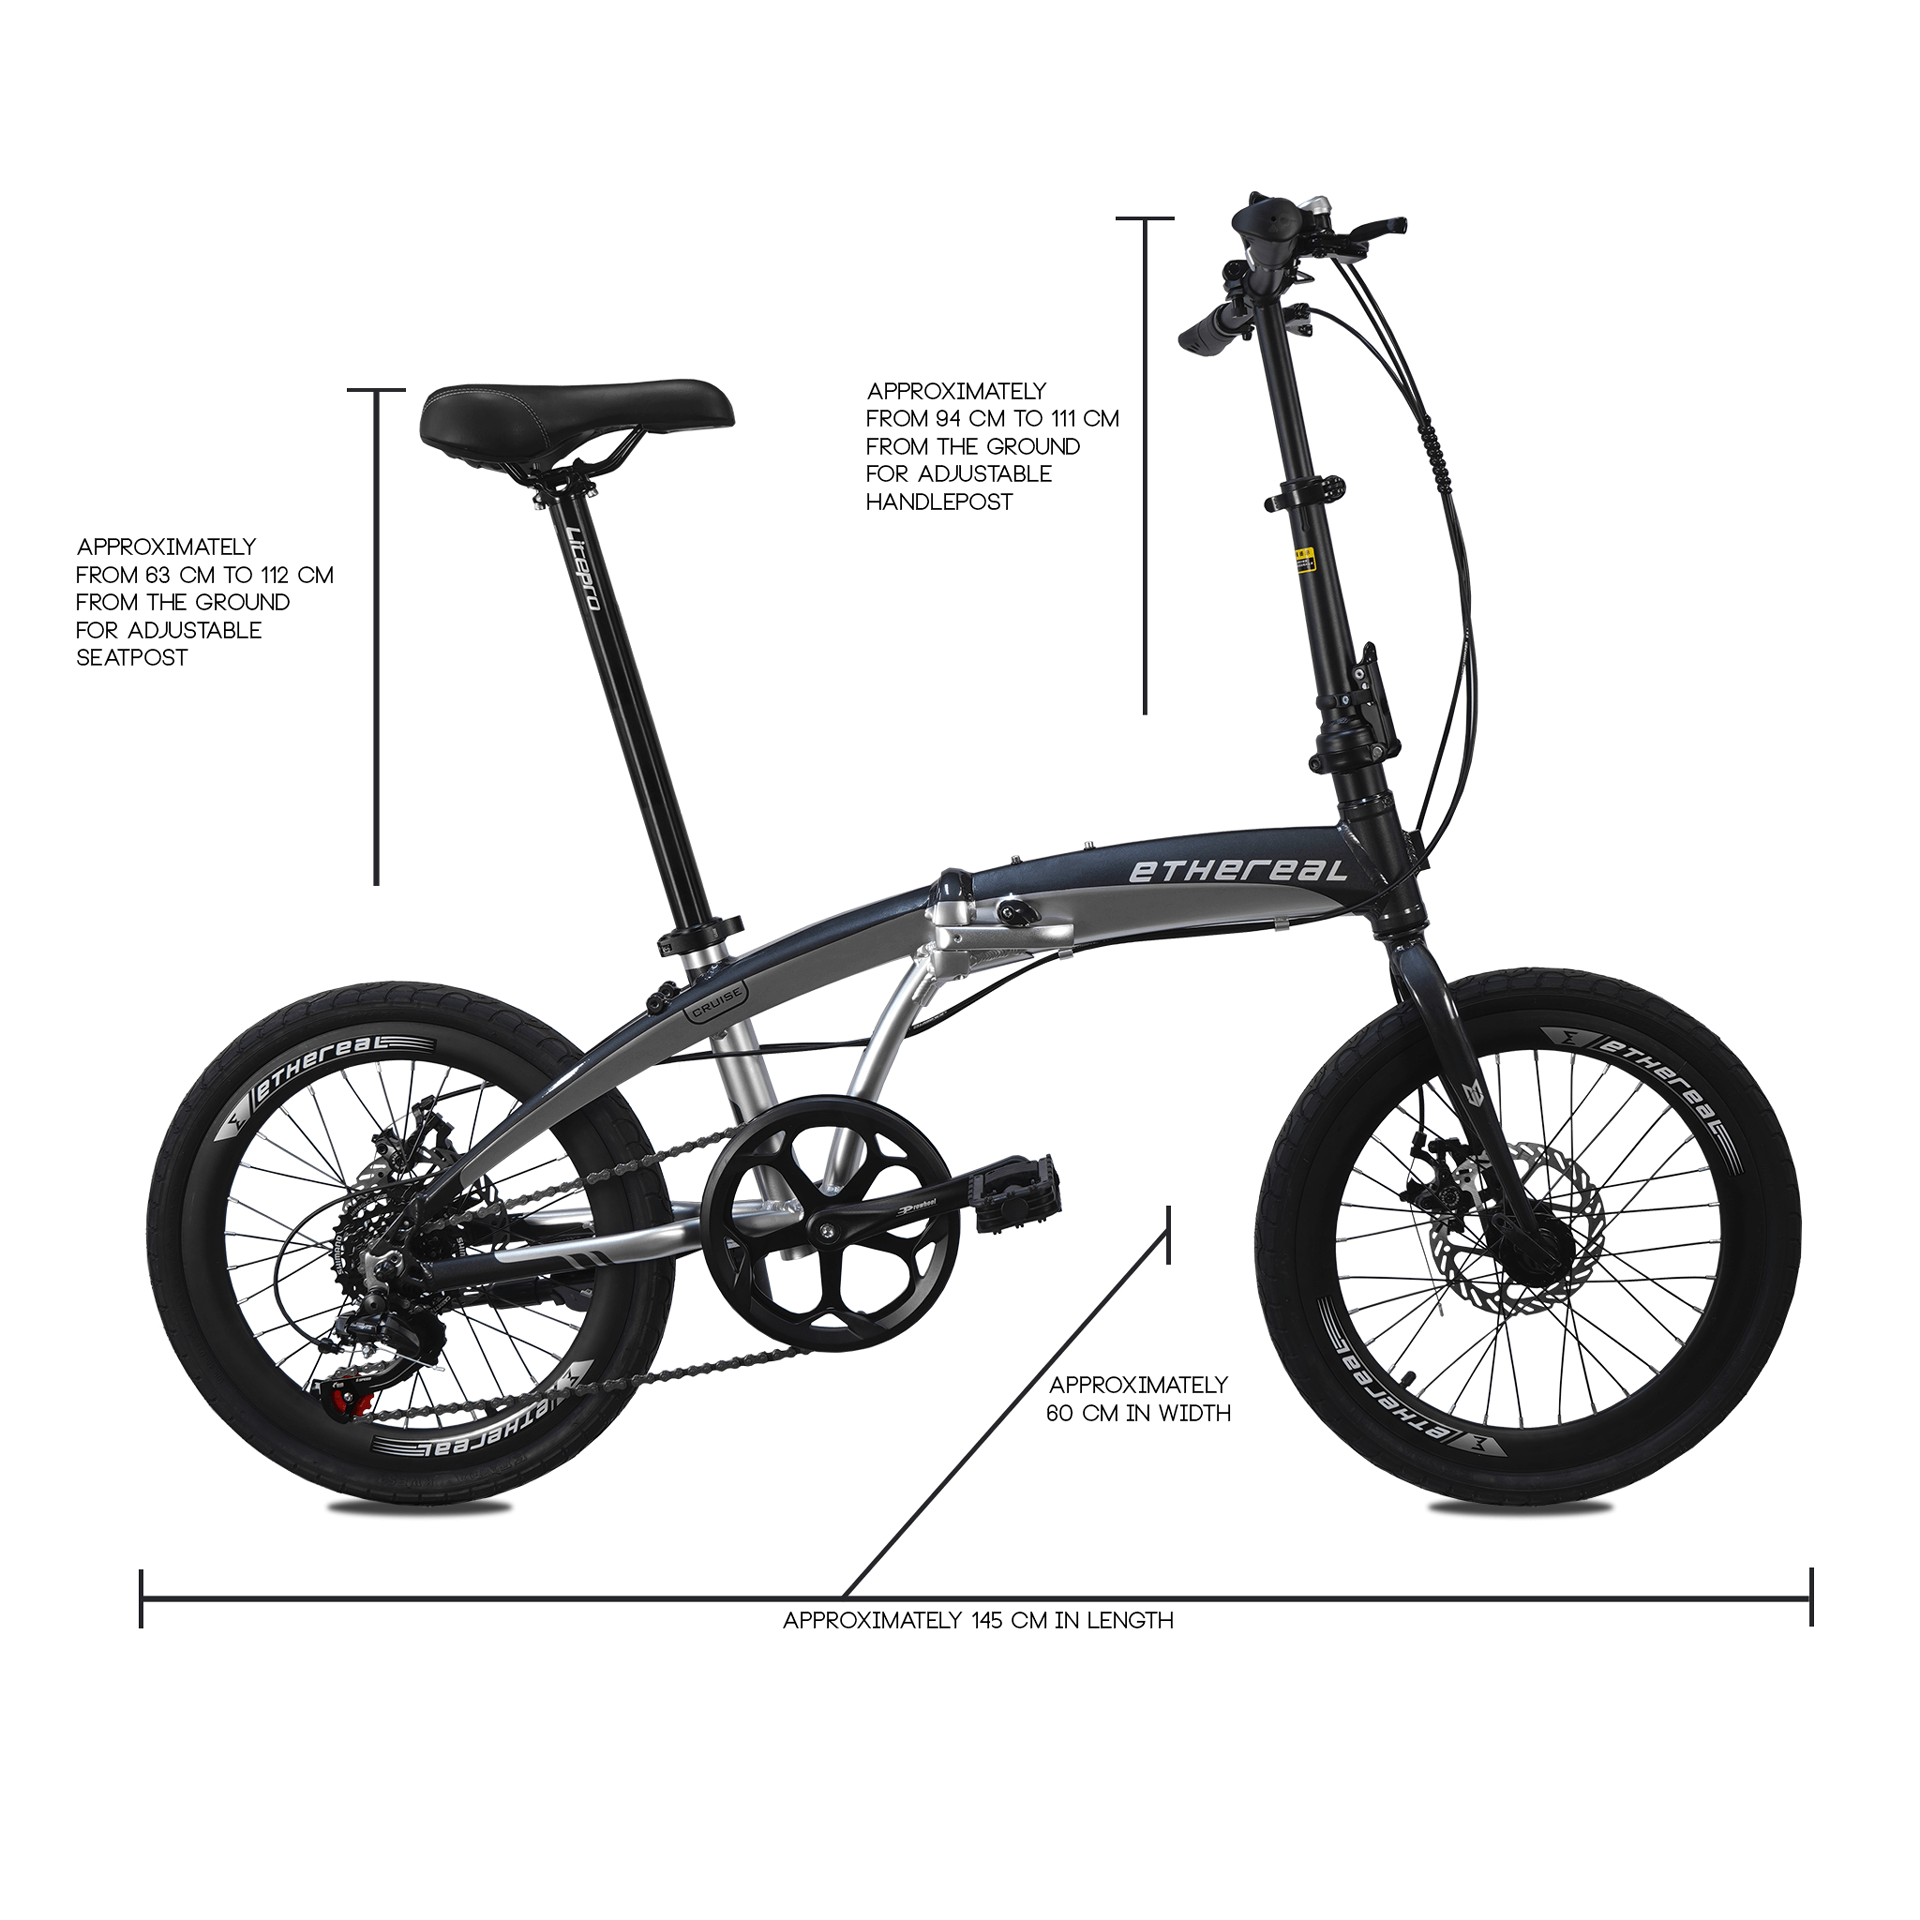 Ethereal Cruise: Premium Foldable Bicycle for Urban Commuting | The Bike Atrium